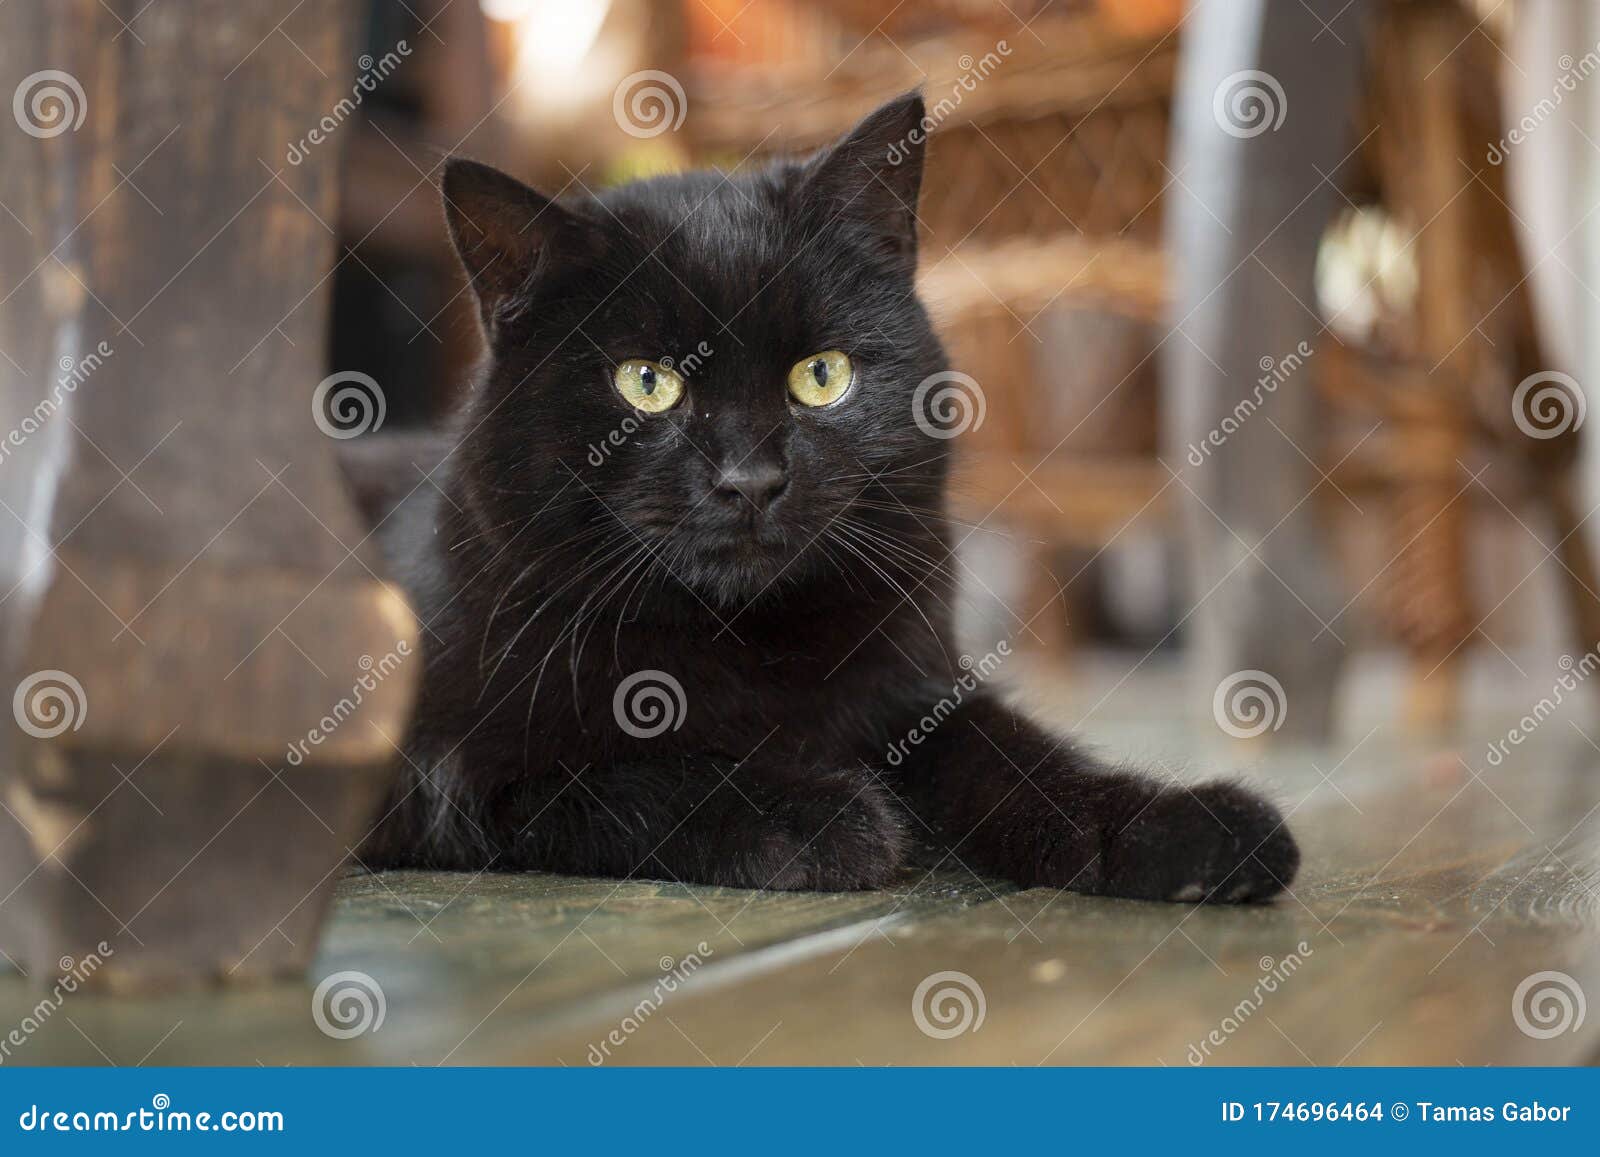 young black bombay cat with yellow eyes lying on the floor